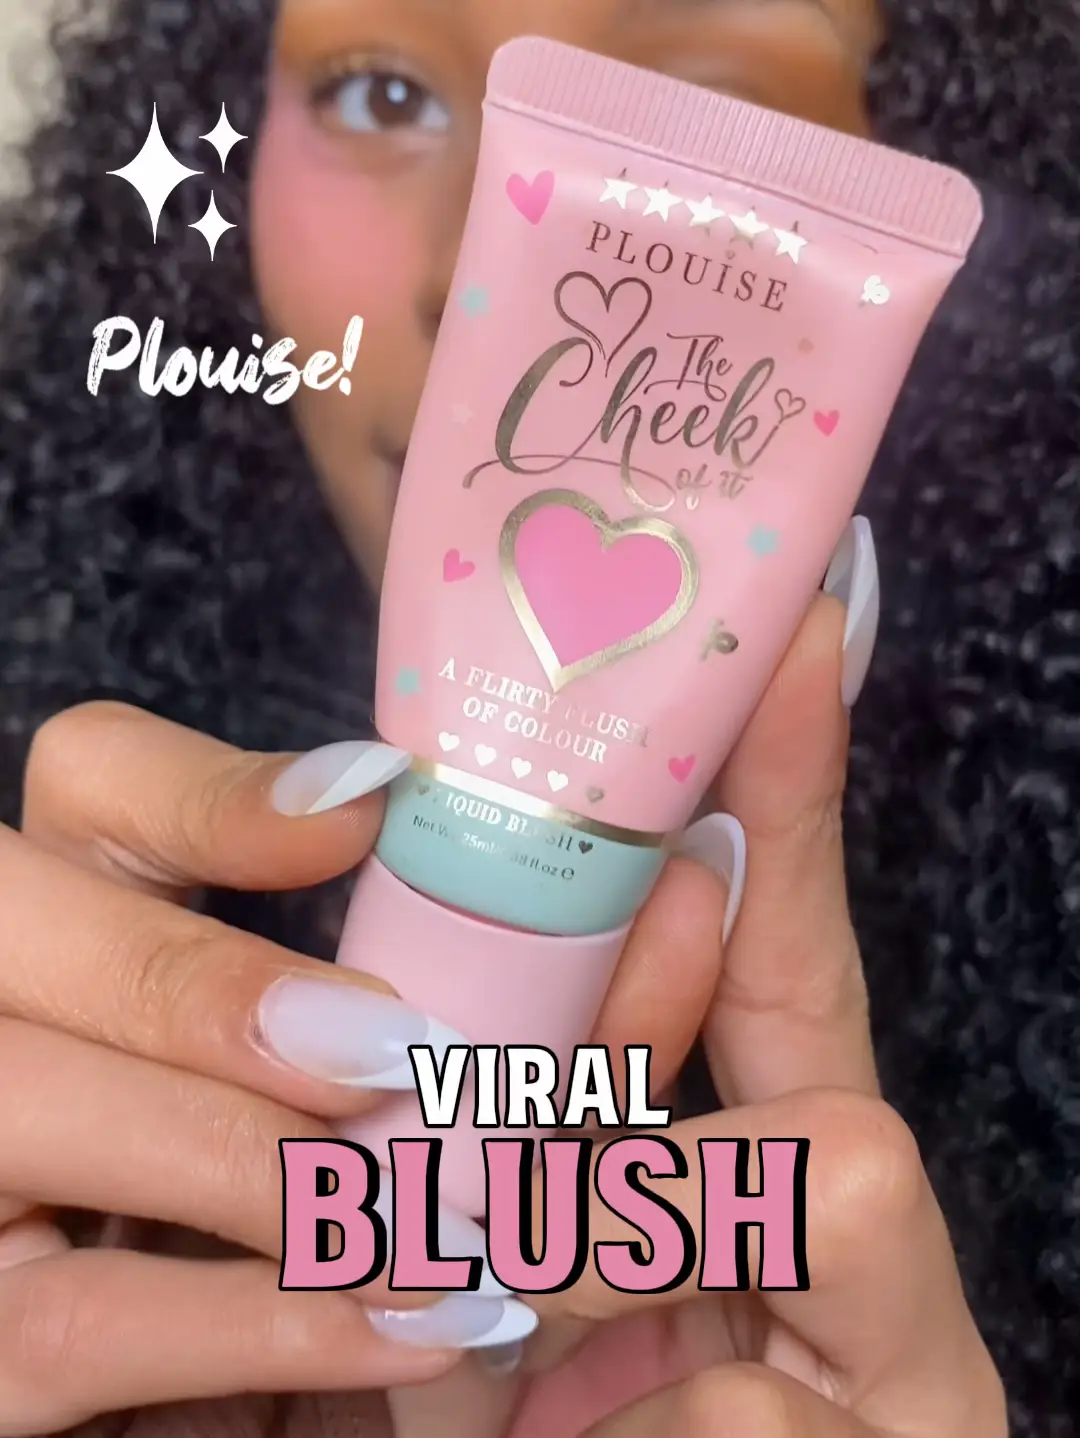  P Louise Blush Viral Bestselling Blush - Legally Pink - 100%  Authentic : Clothing, Shoes & Jewelry